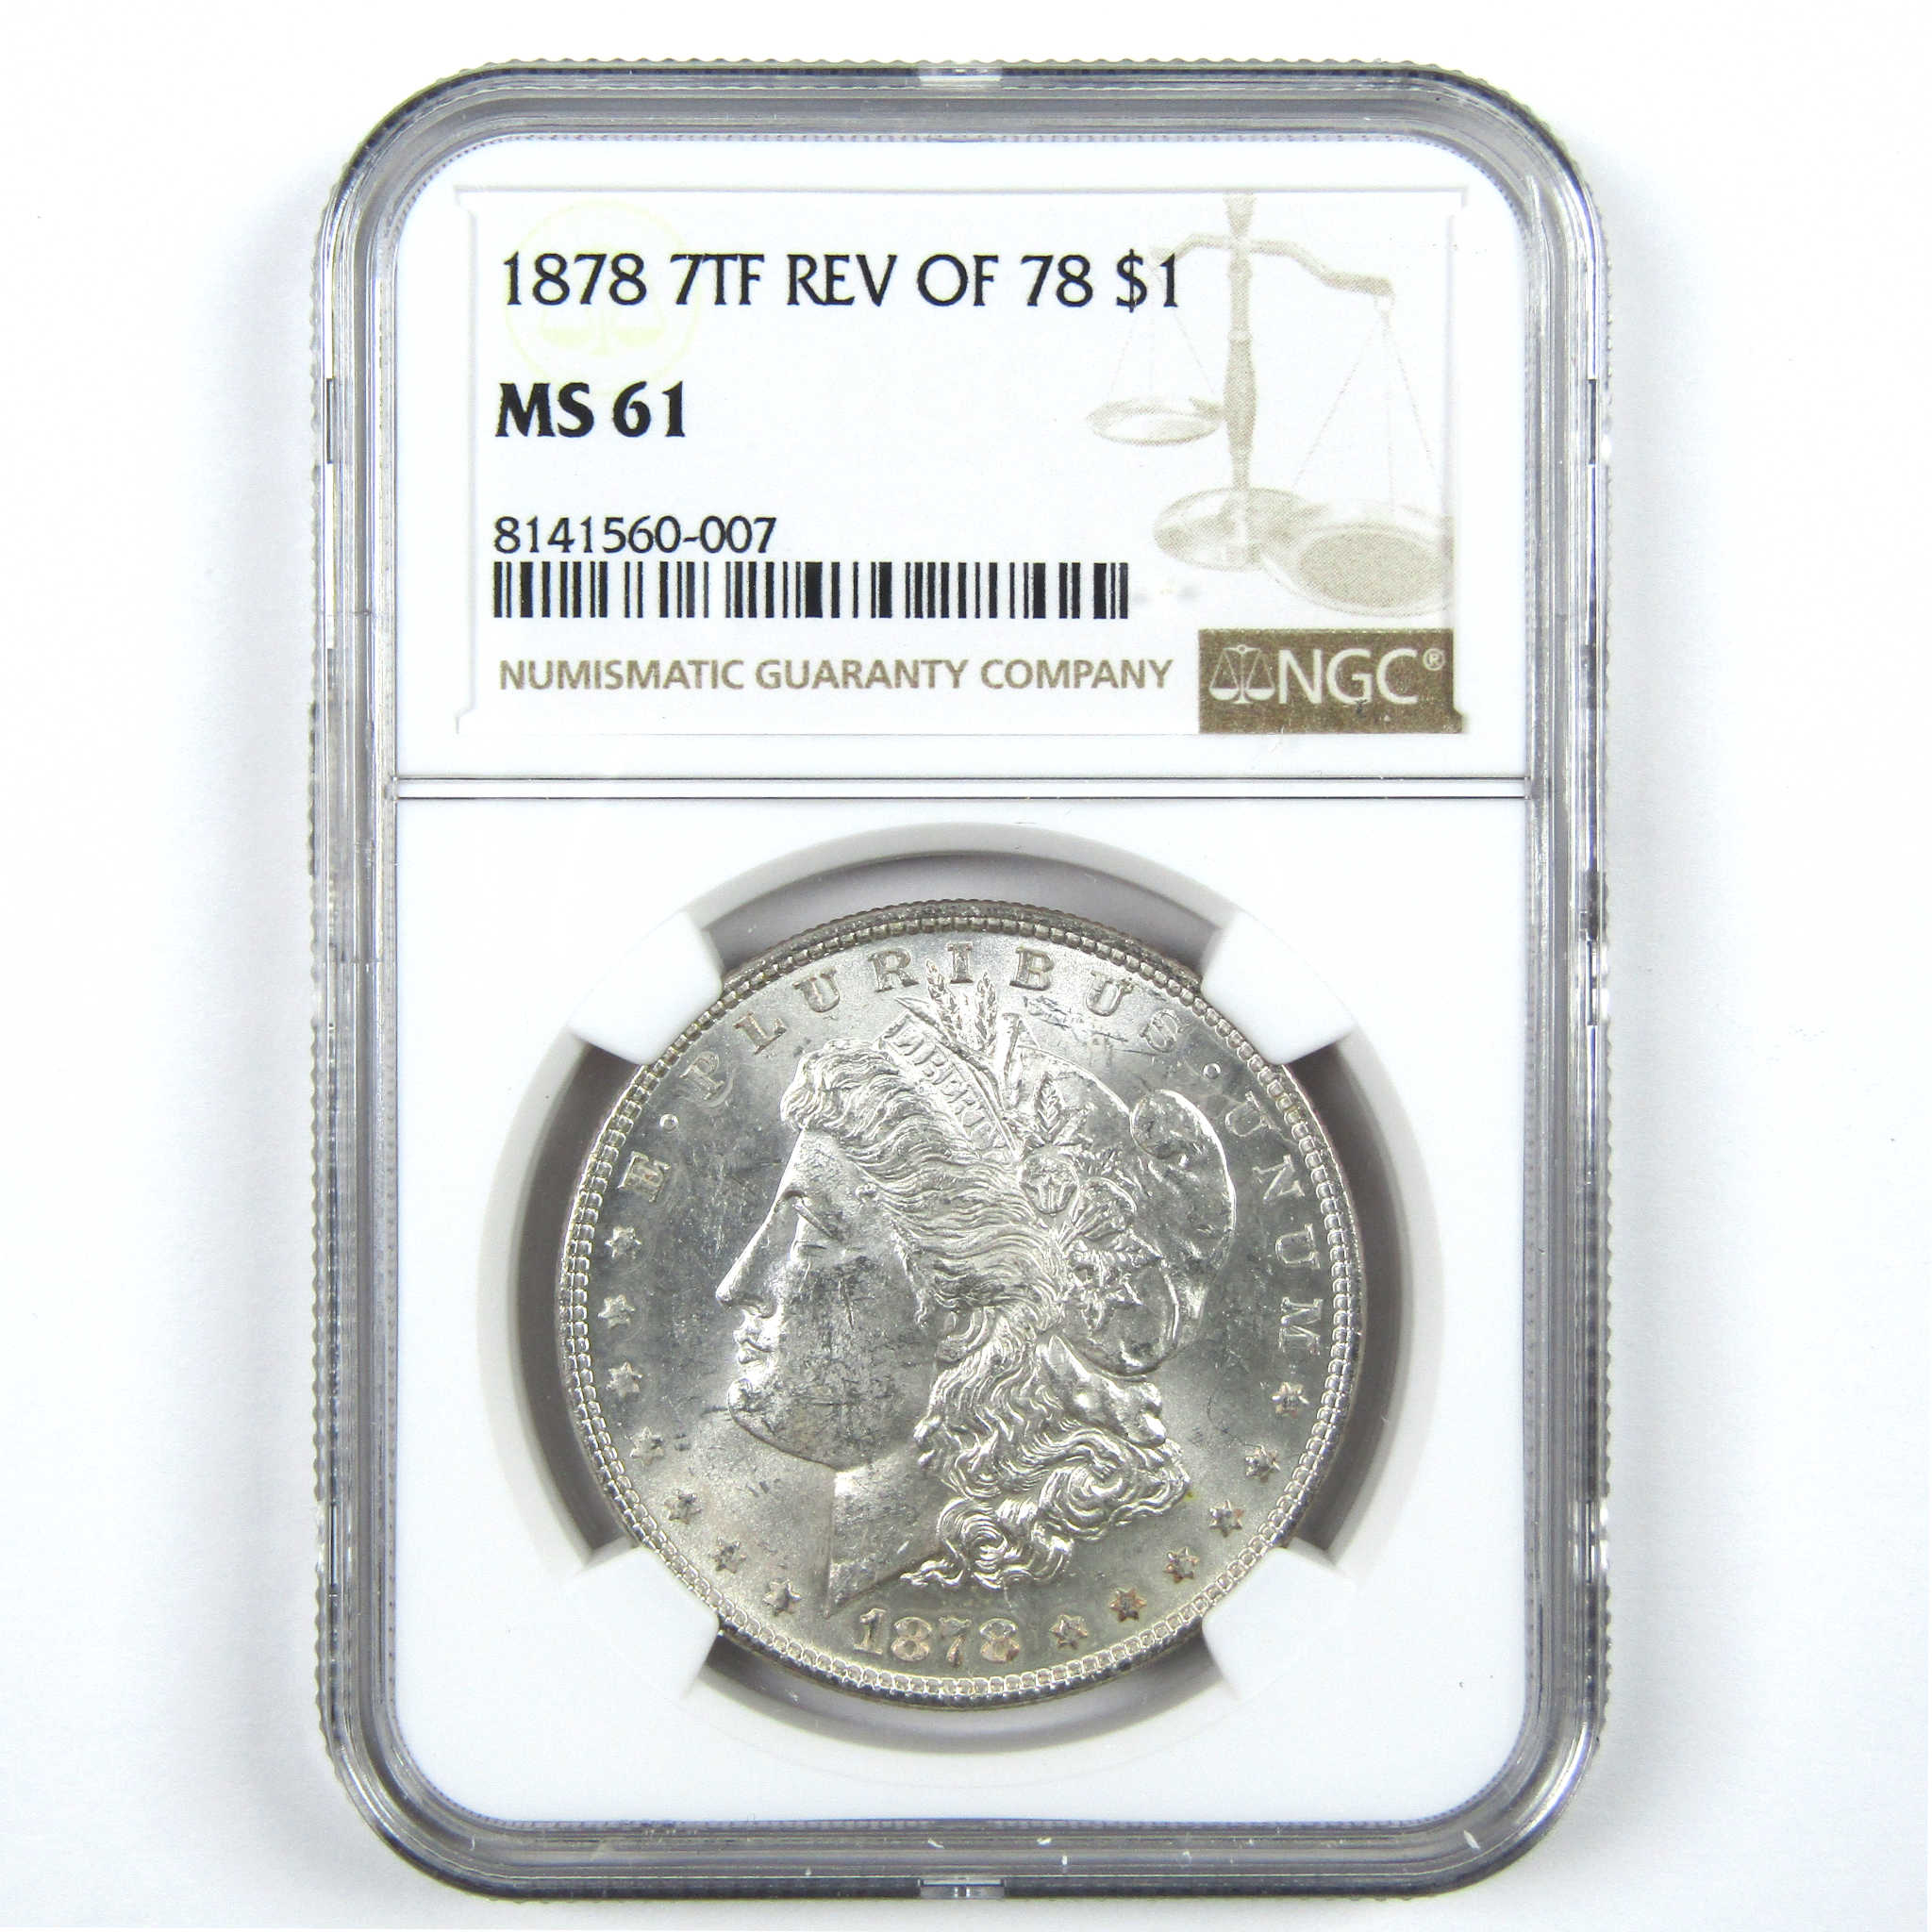 1878 7TF Rev 78 Morgan Dollar MS 61 NGC Uncirculated SKU:I14032 - Morgan coin - Morgan silver dollar - Morgan silver dollar for sale - Profile Coins &amp; Collectibles